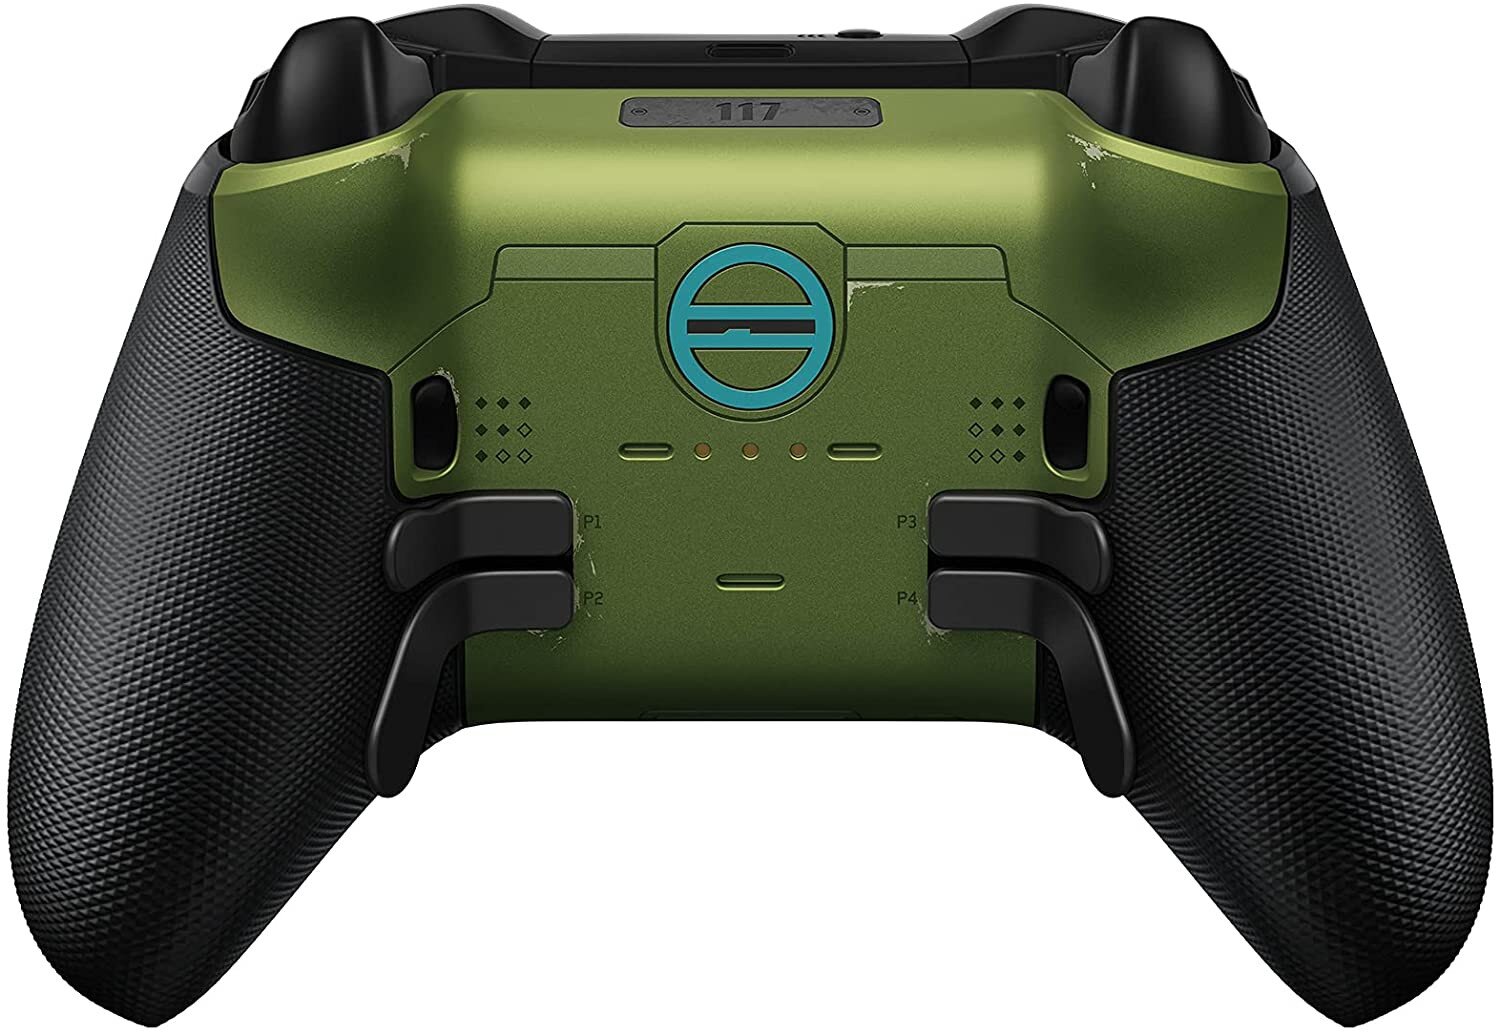  Halo Infinite Limited Edition Elite Series 2 Controller for Series  X